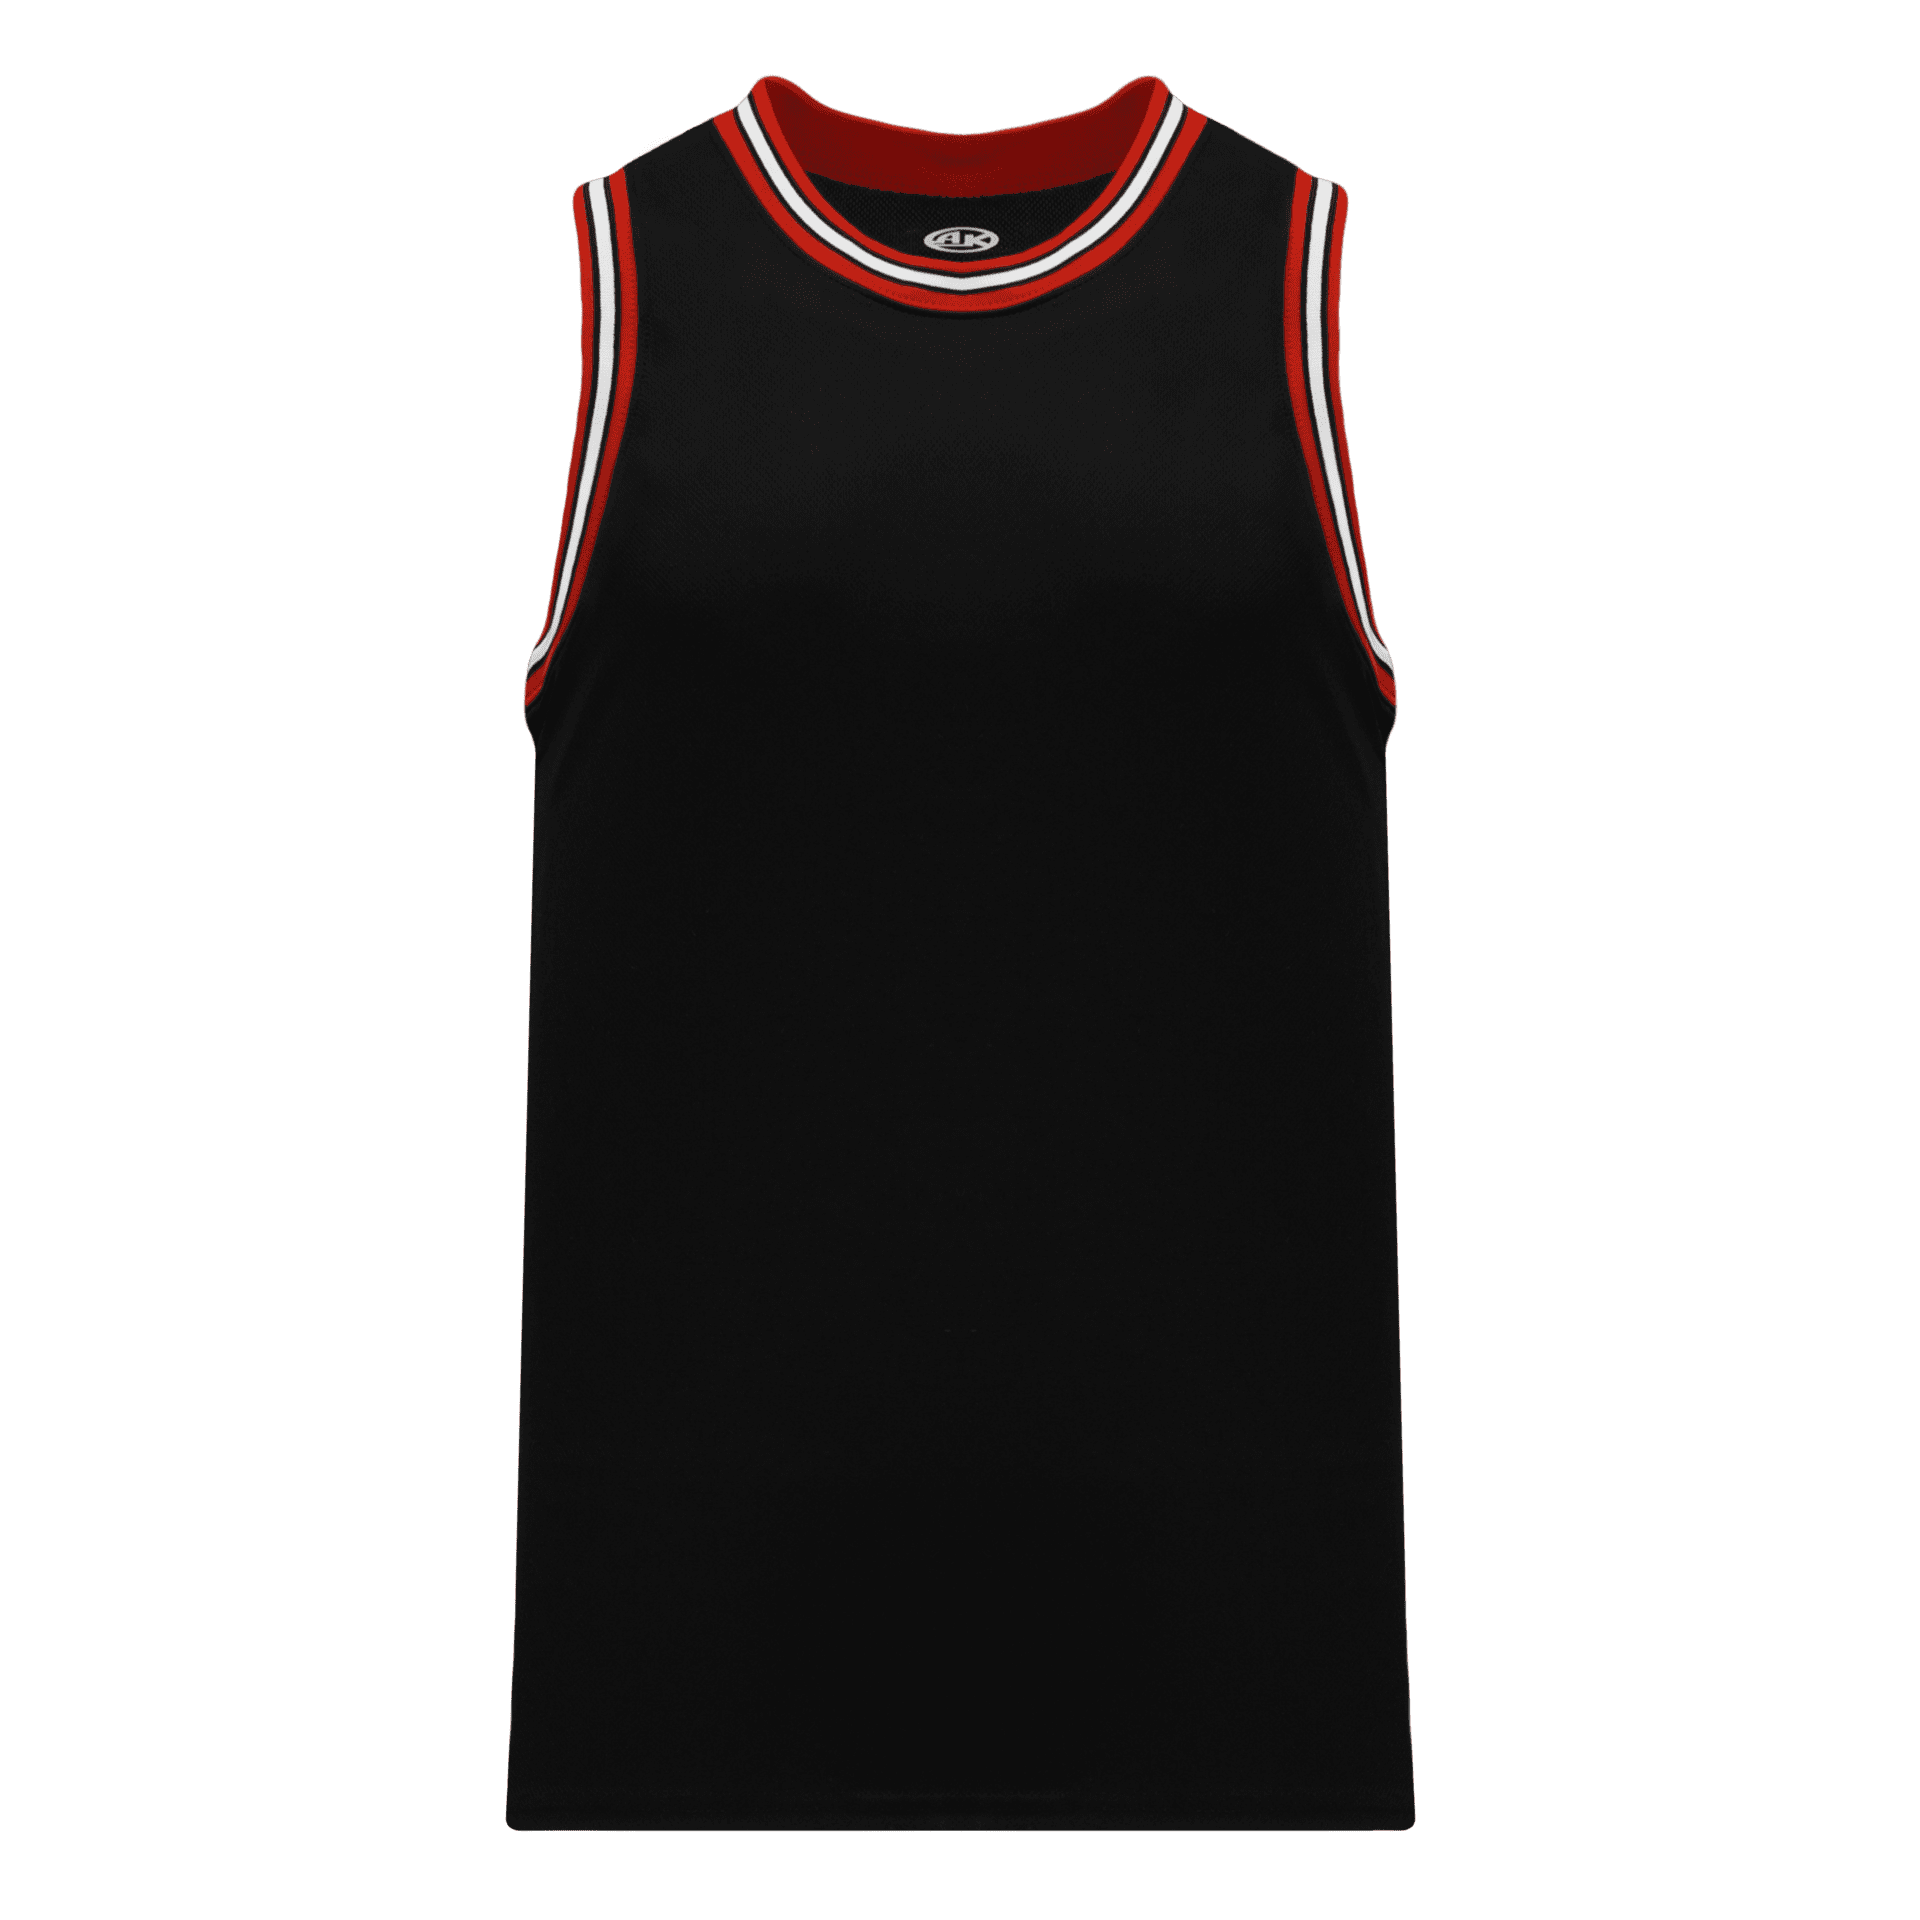 ATHLETIC KNIT PRO BASKETBALL JERSEY #B1710 Black / Red / White